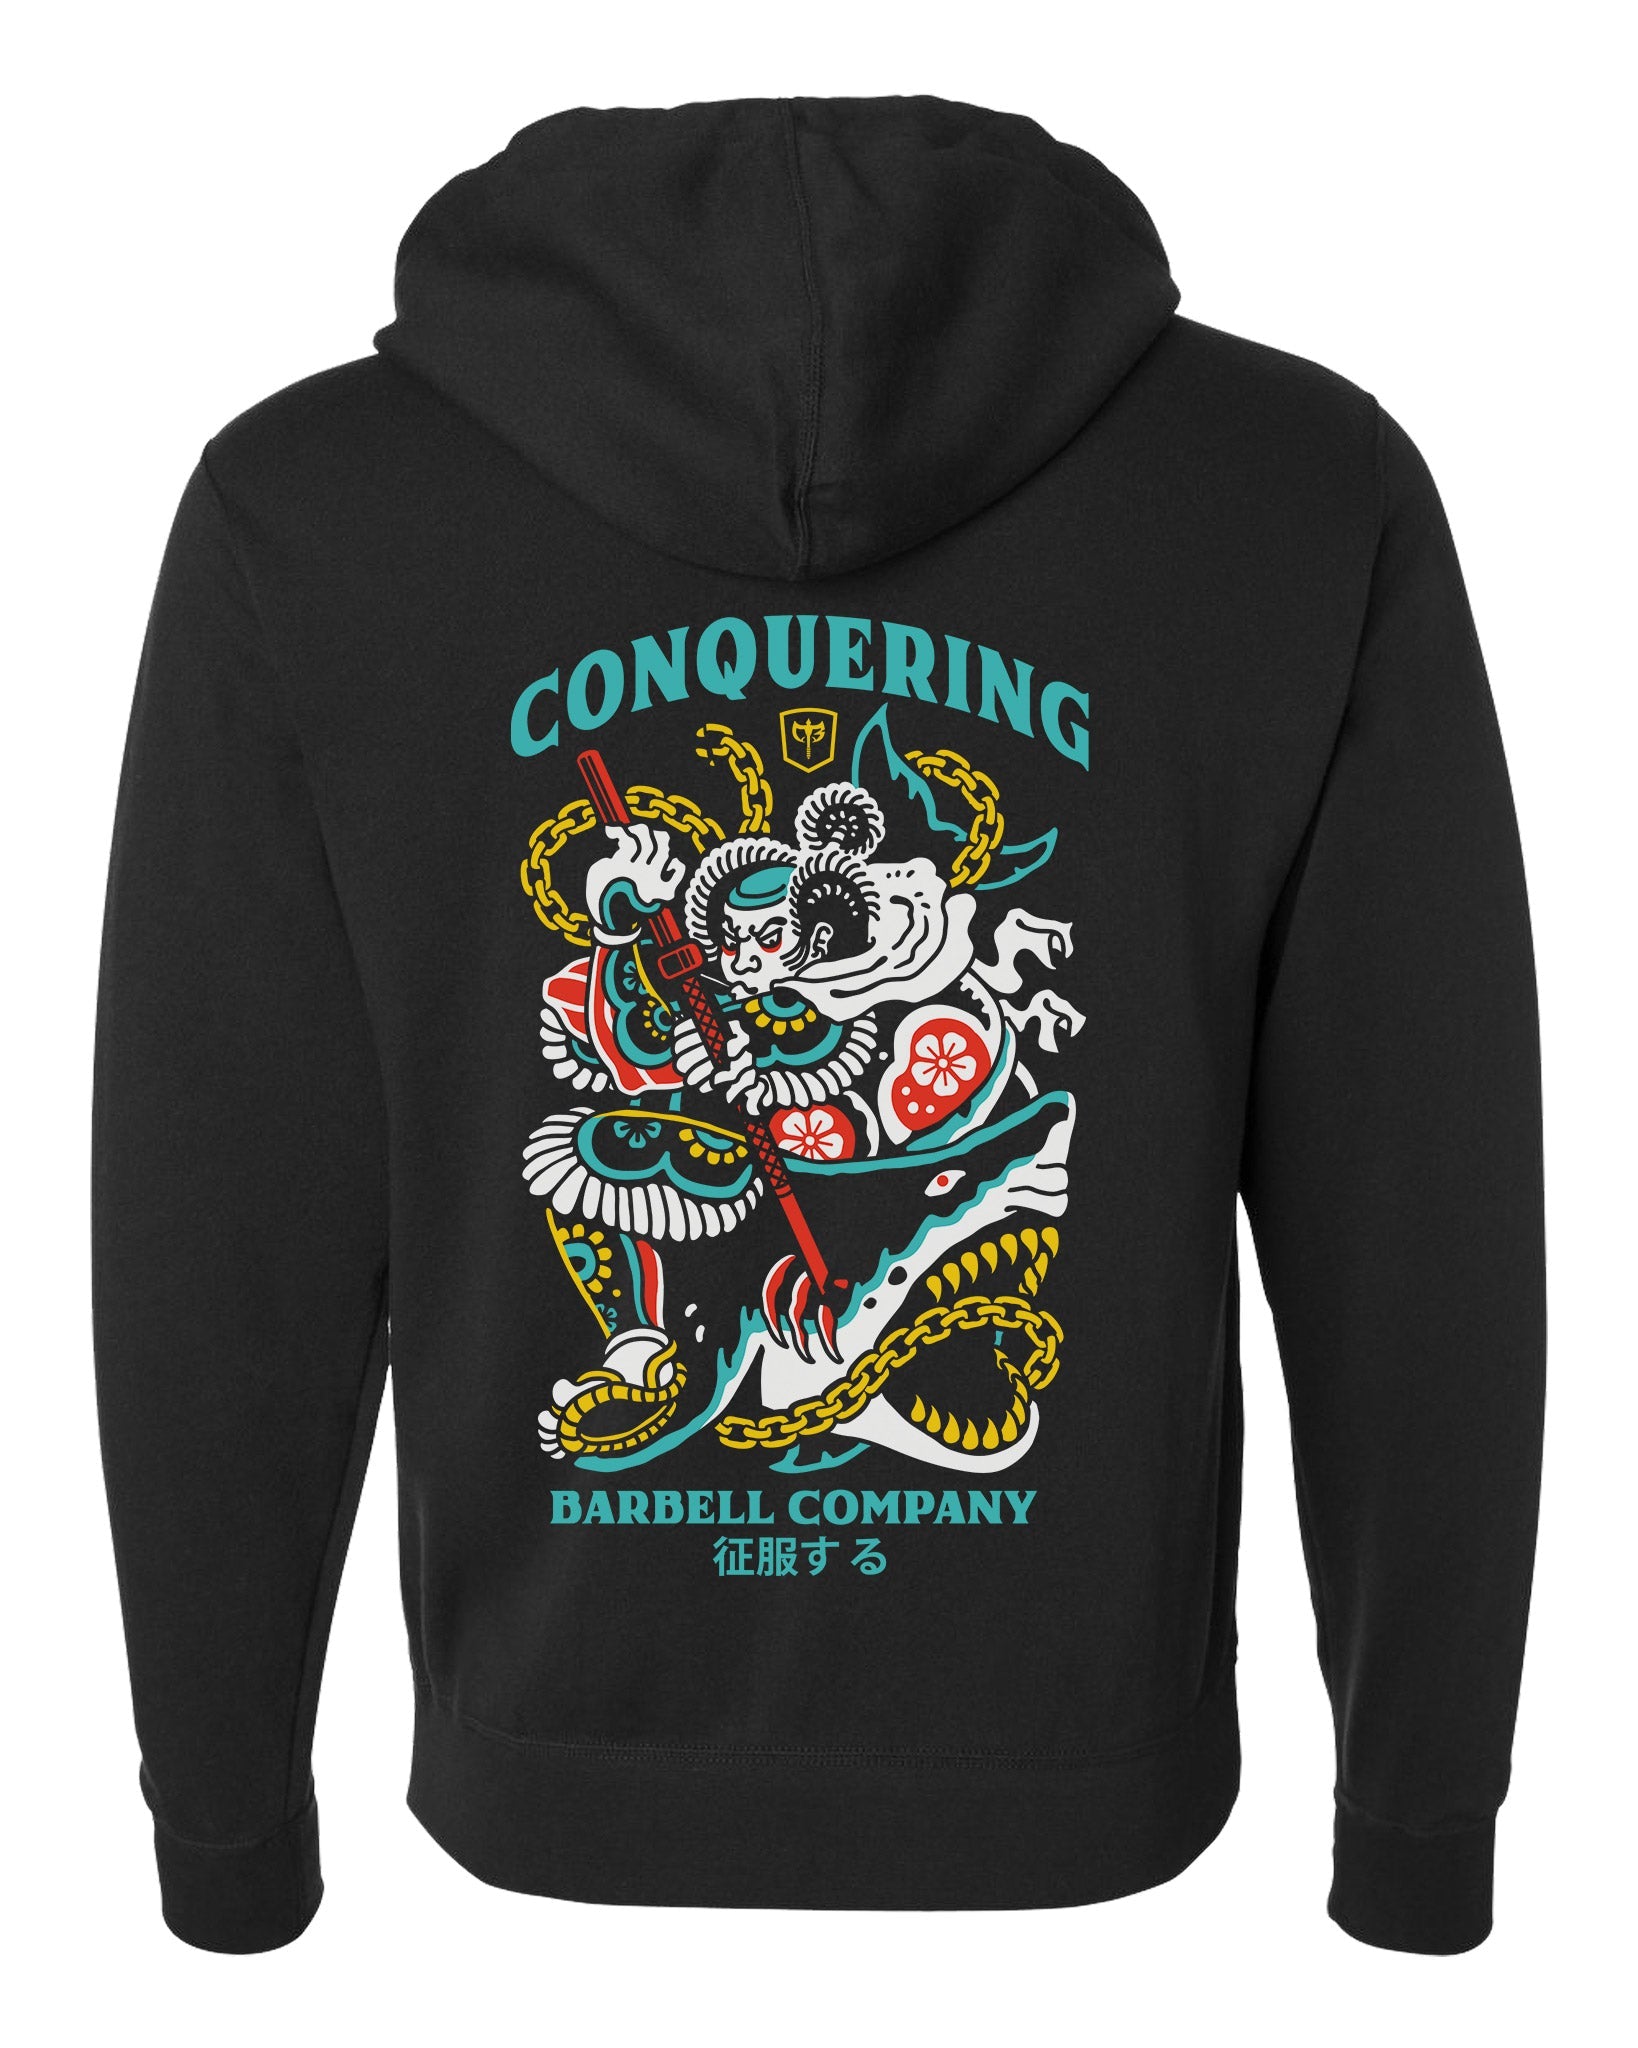 Conquer - Bushido - on Black Pullover Hoodie